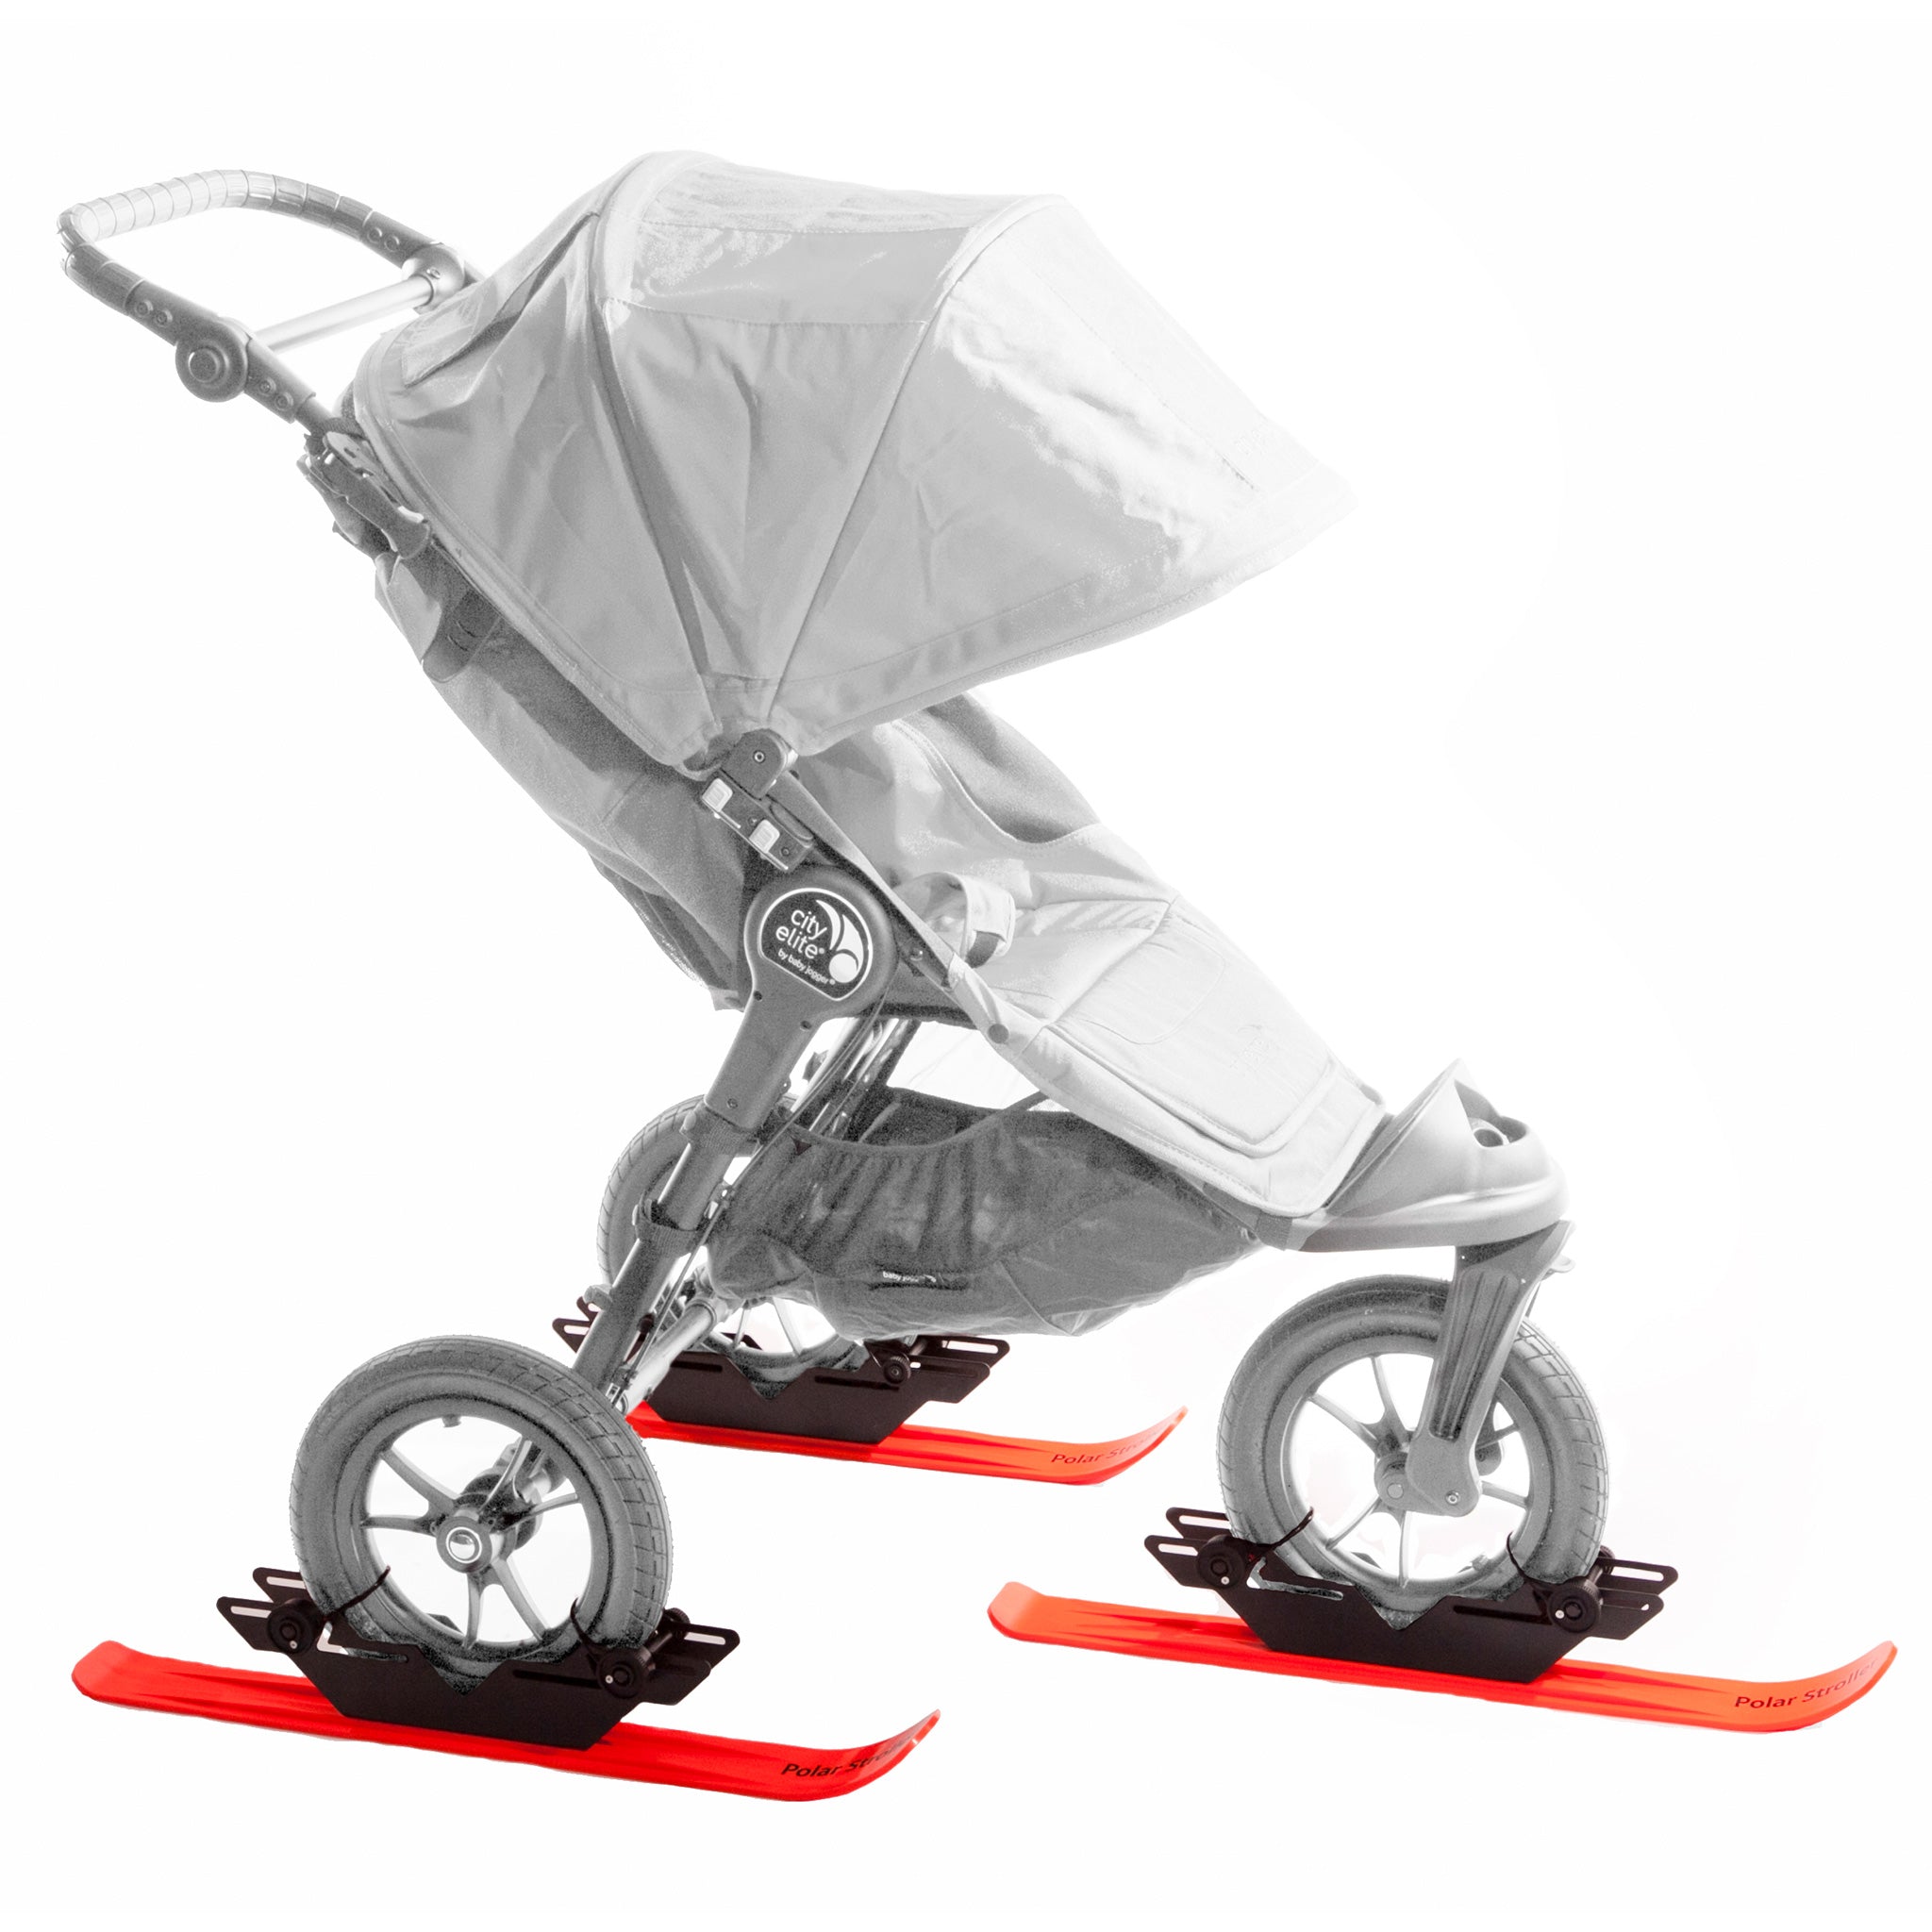 Polar Ski set of 3 for Strollers, bike trailers, chariot, Joggers, Dog wheelchairs,